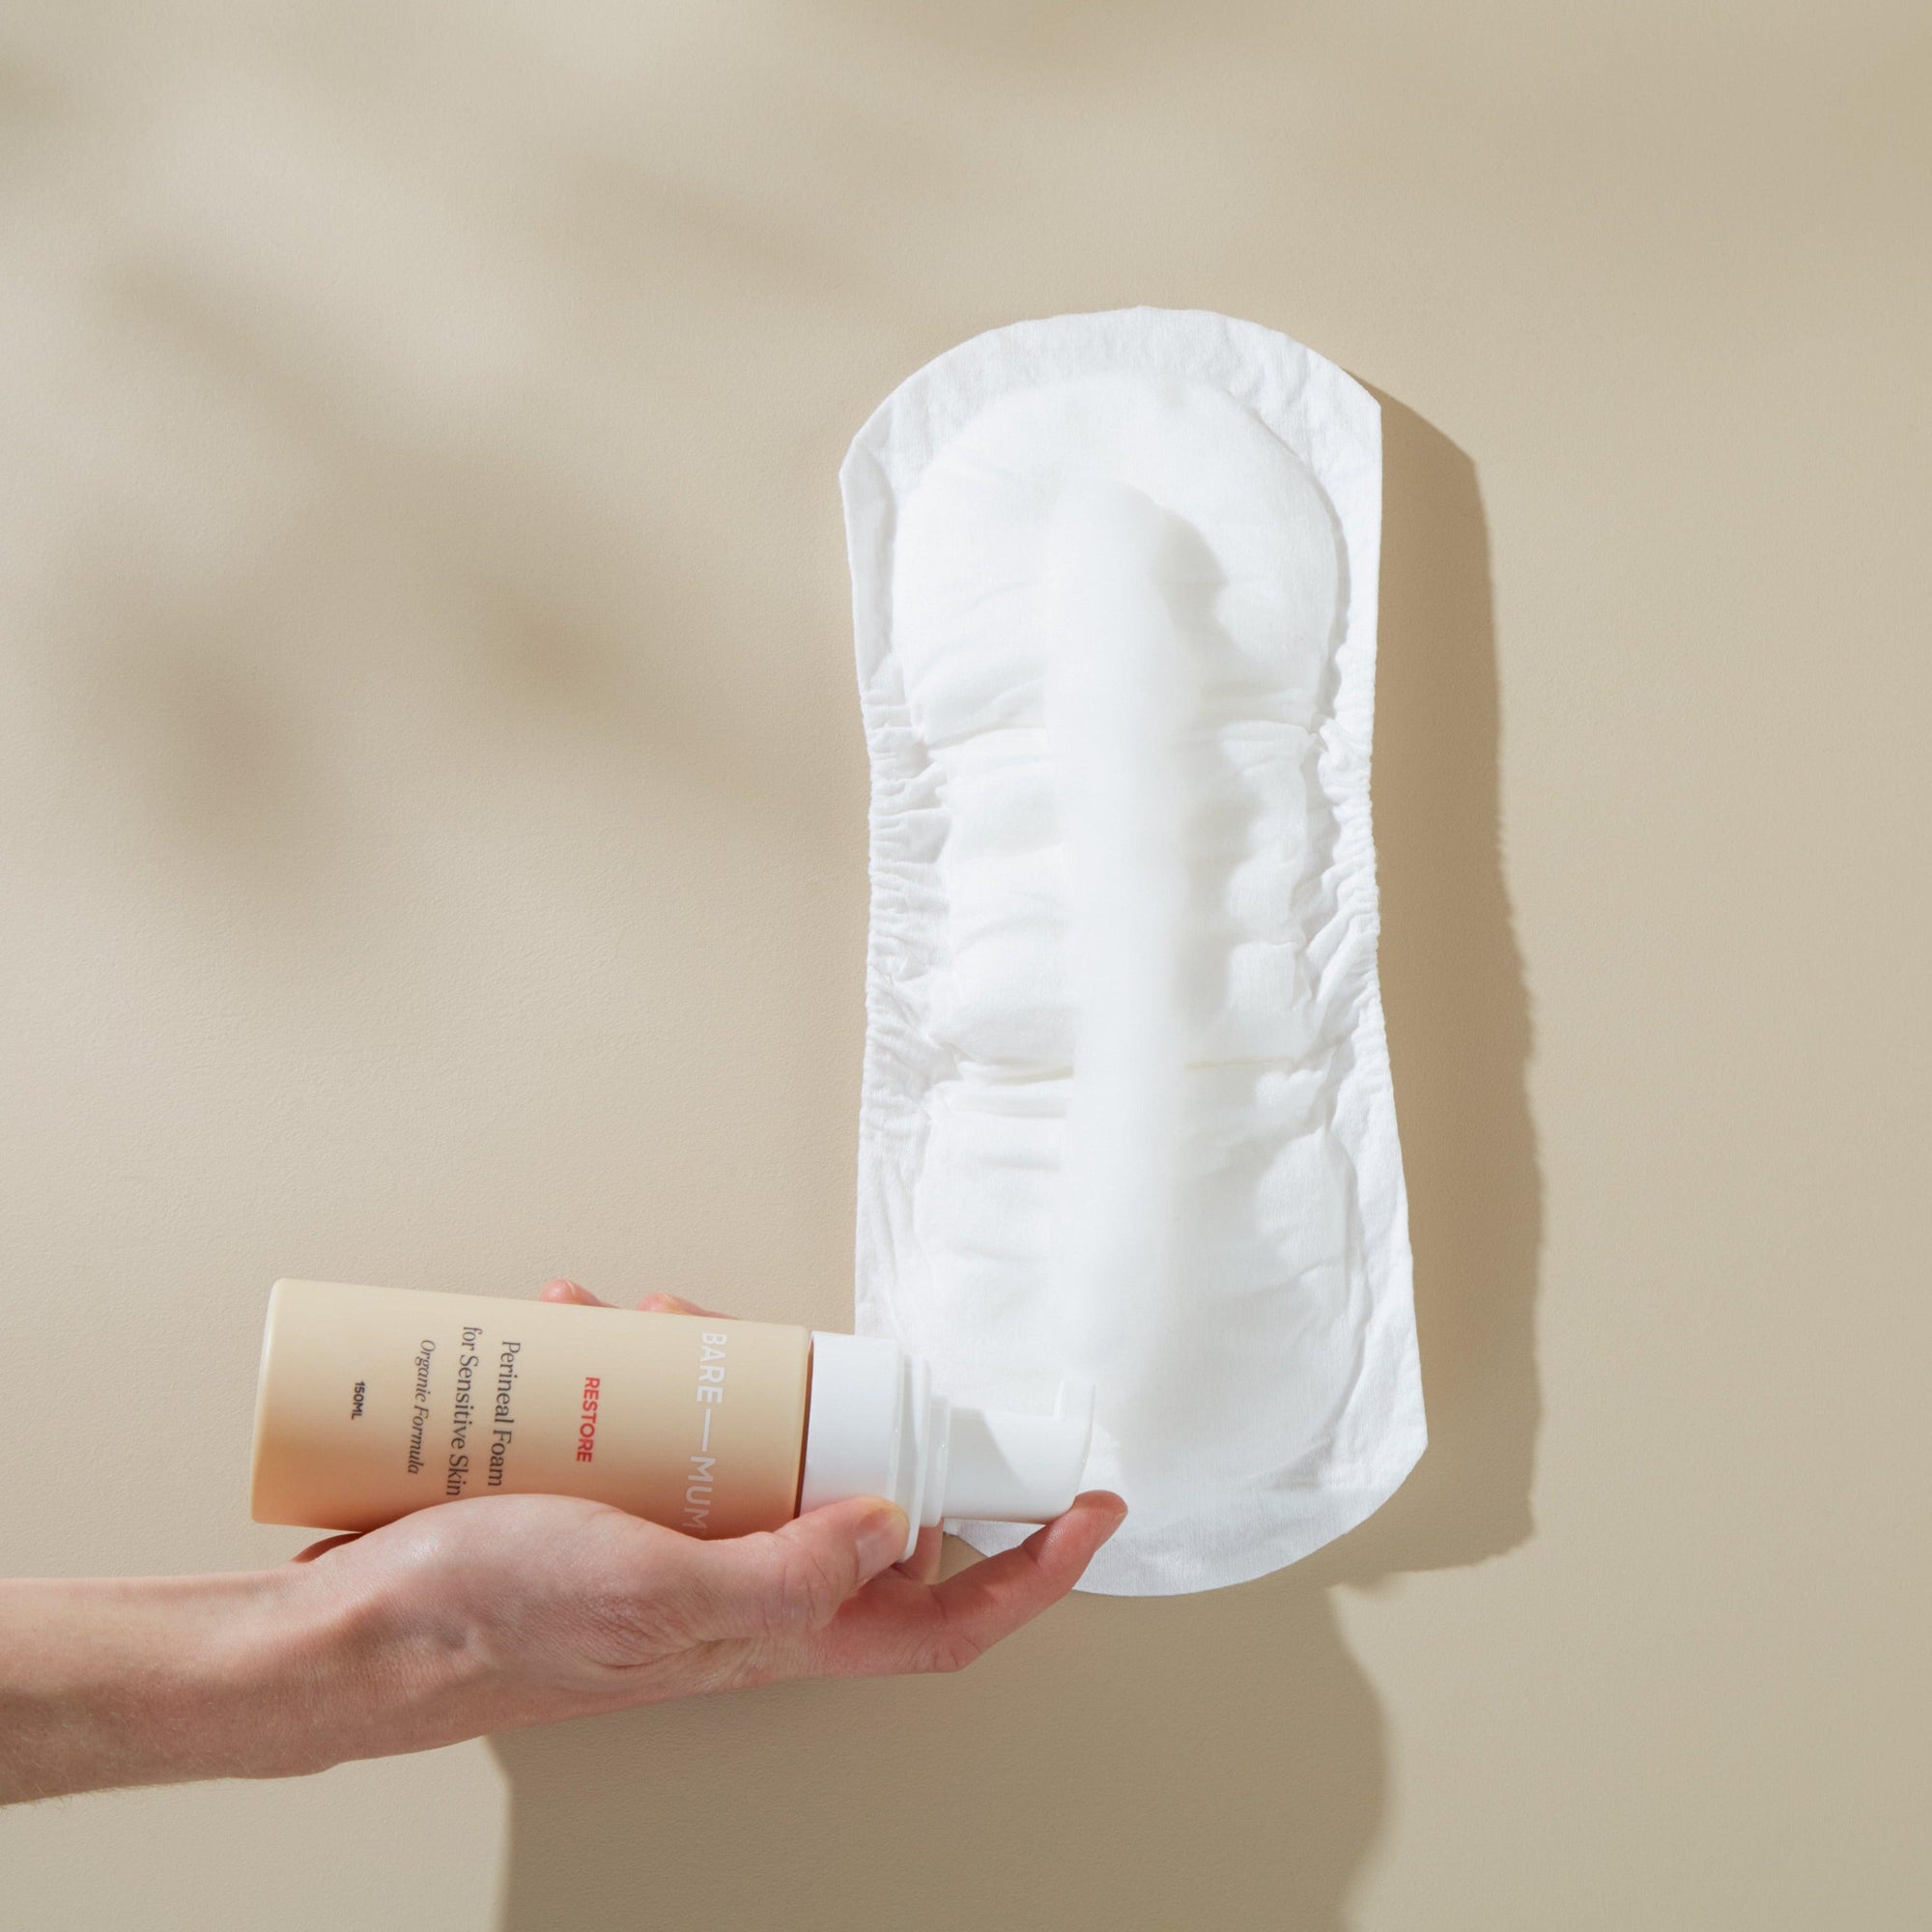 A hand holding a bottle of Bare Mum Perineal Foam and a Postpartum Pad for postpartum recovery on a beige background.